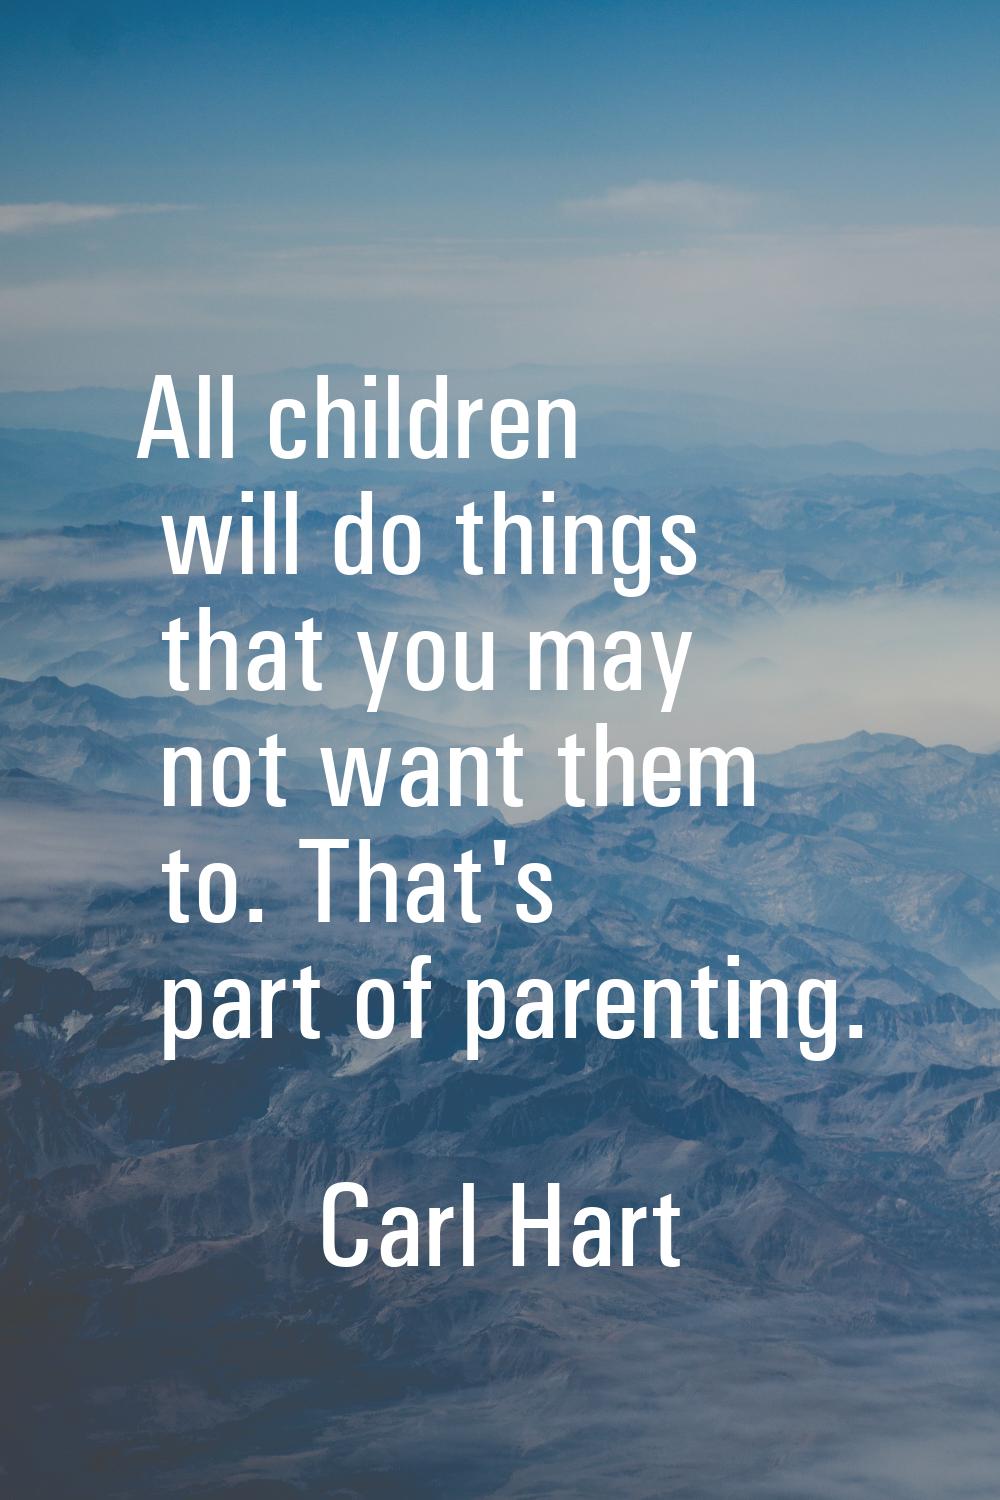 All children will do things that you may not want them to. That's part of parenting.